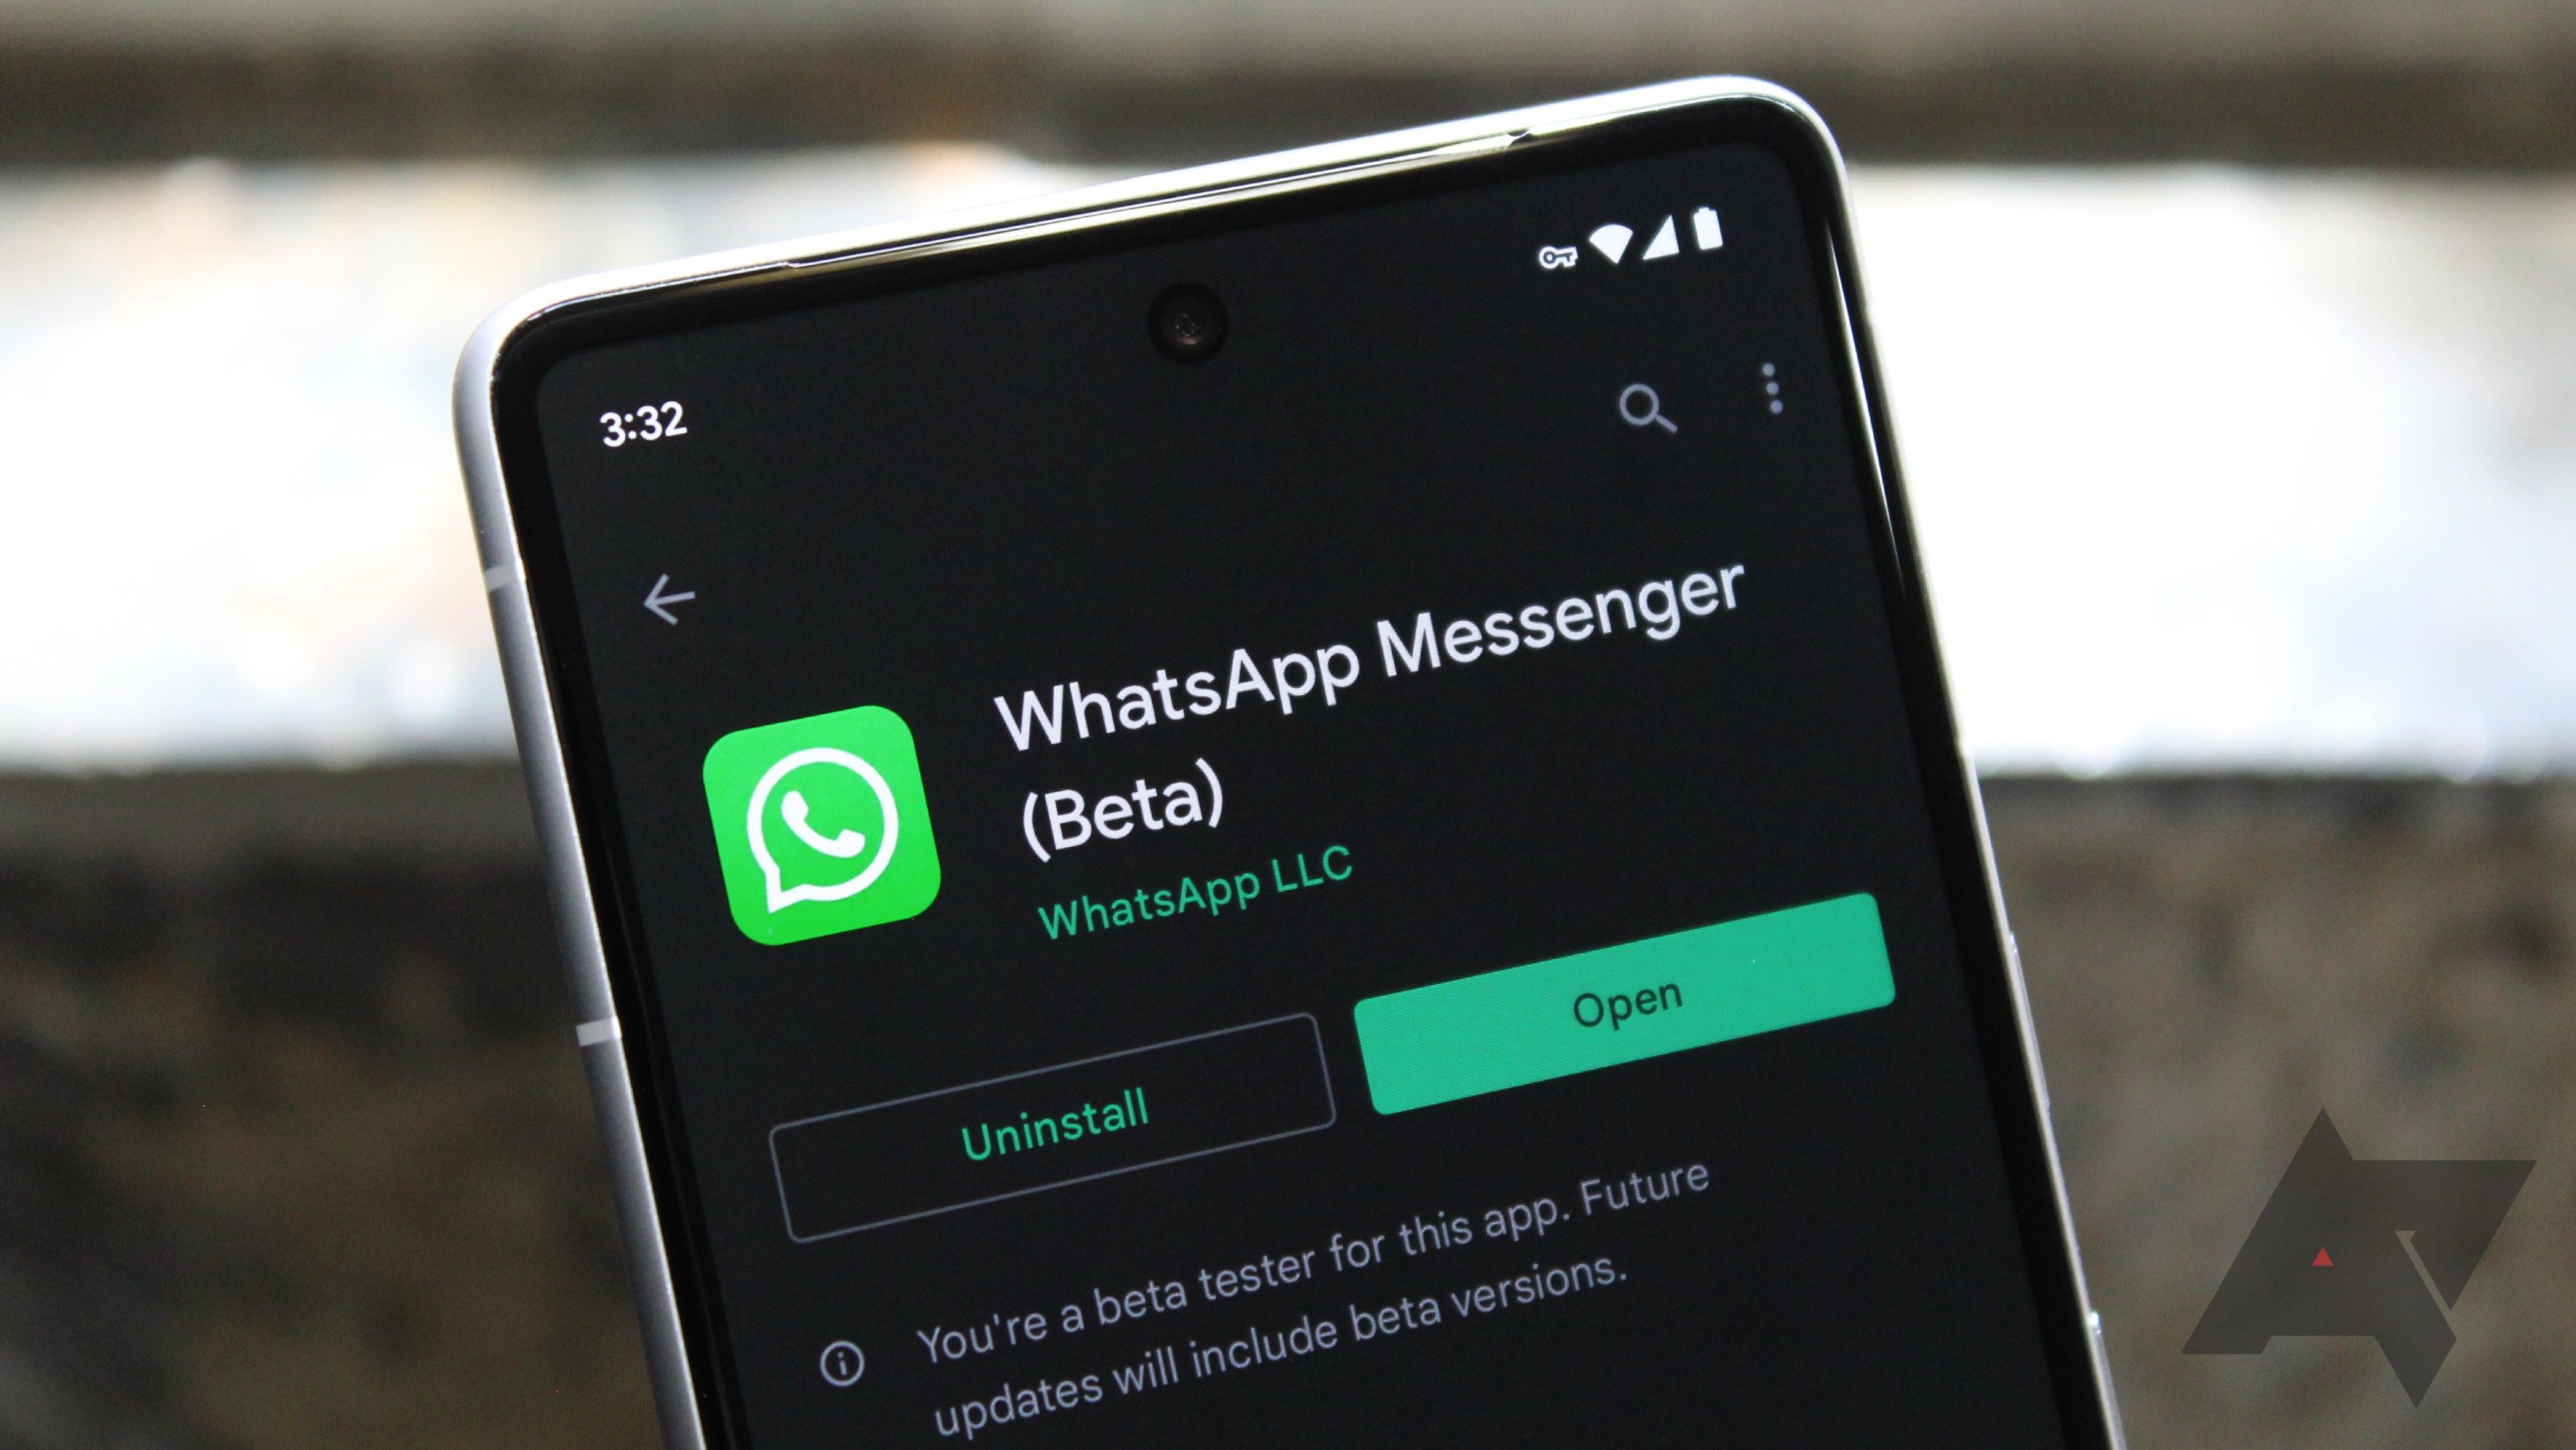 Latest WhatsApp beta update now includes direct access to Meta AI from search bar